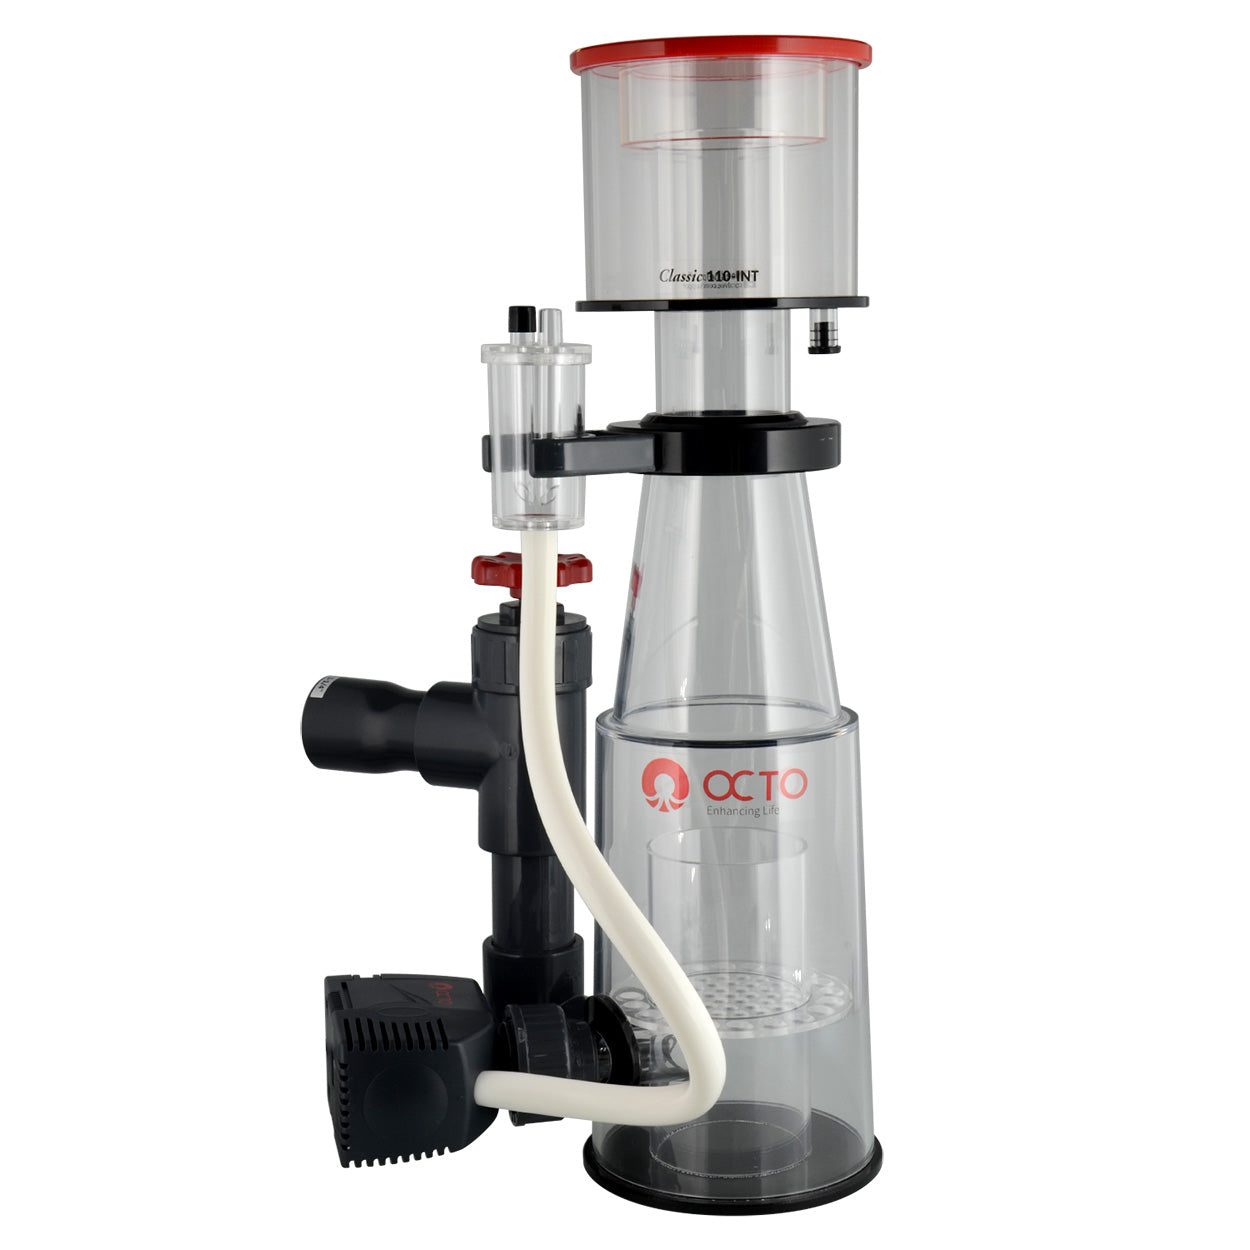 OCTO Classic Protein Skimmer 110-INT